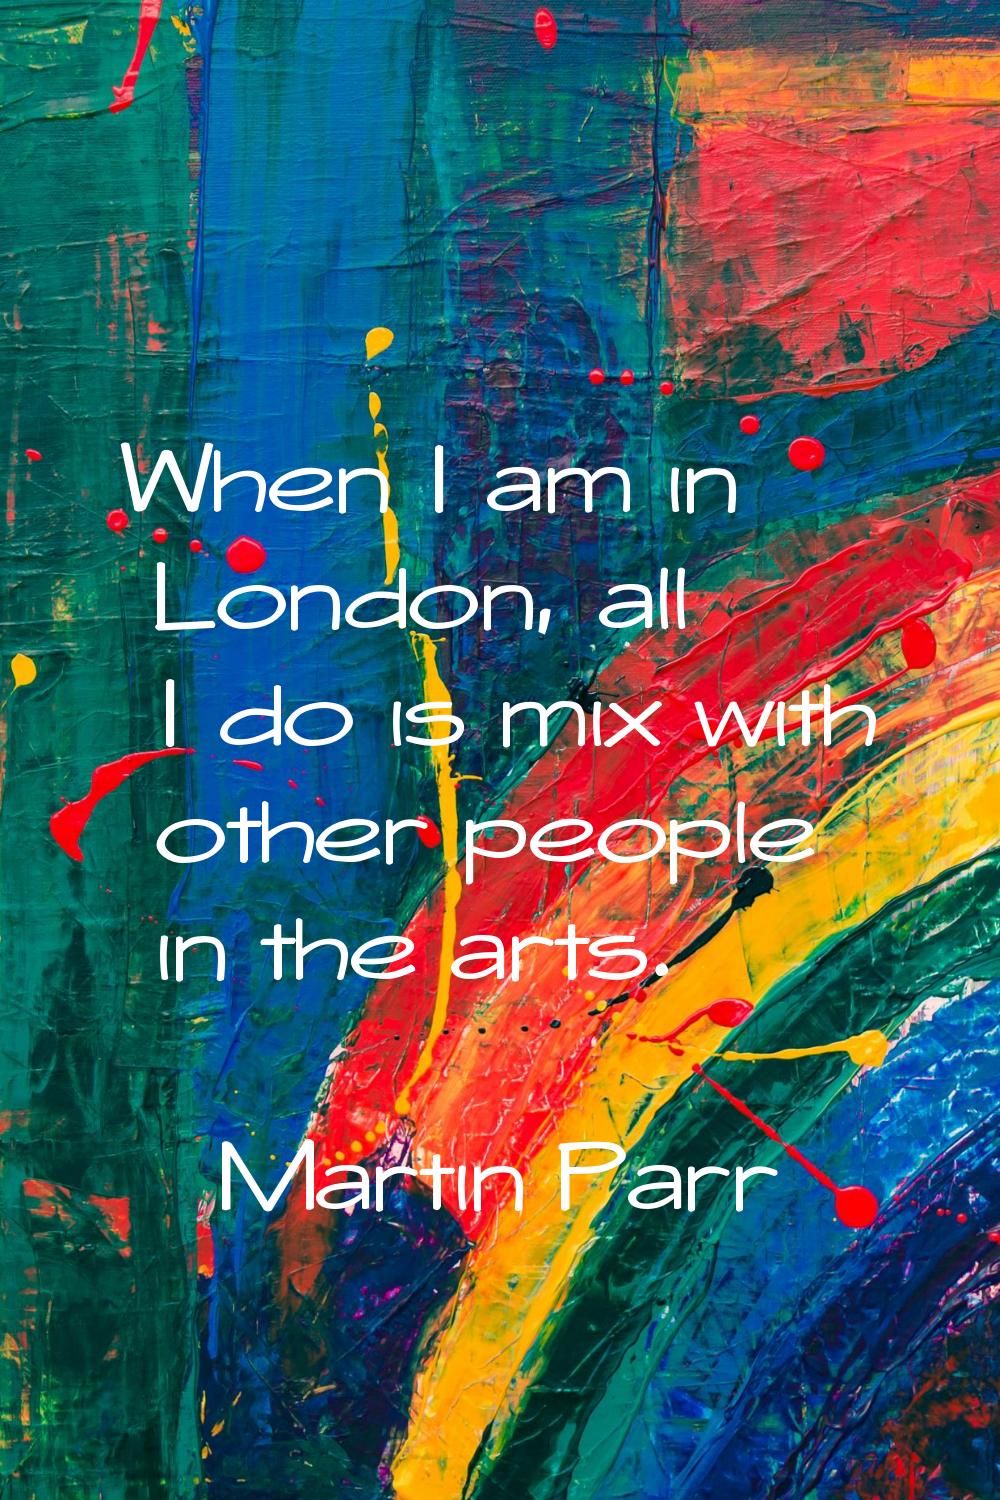 When I am in London, all I do is mix with other people in the arts.